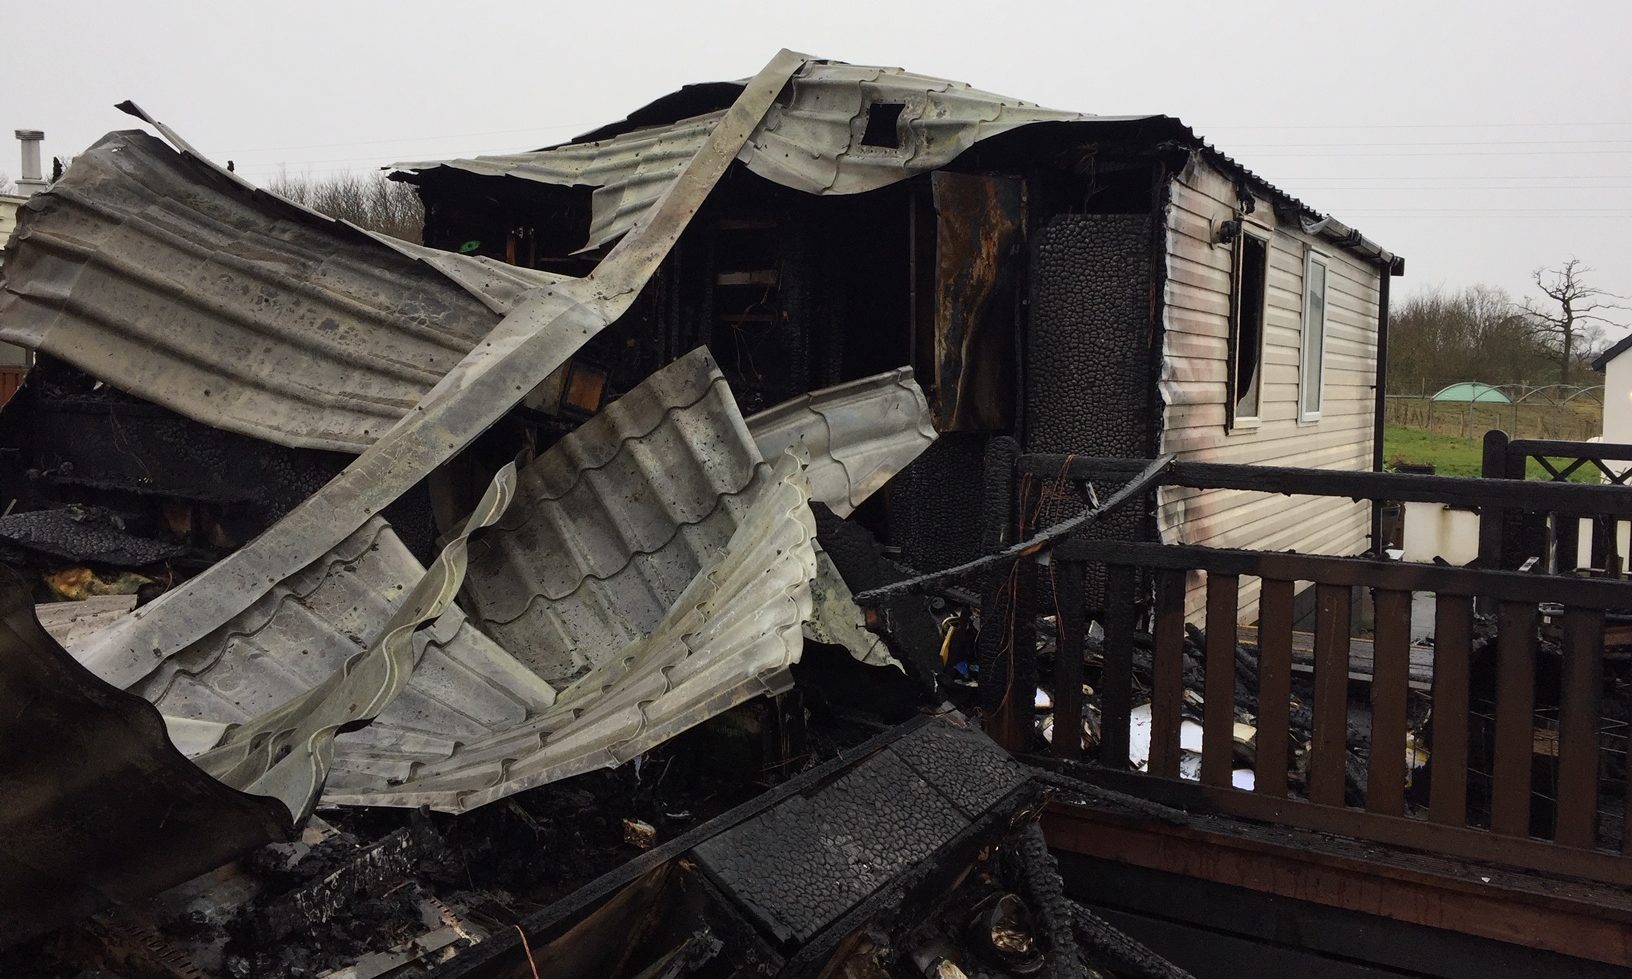 An 86-year-old man was pulled from his caravan near Windygates as it was destroyed by fire.